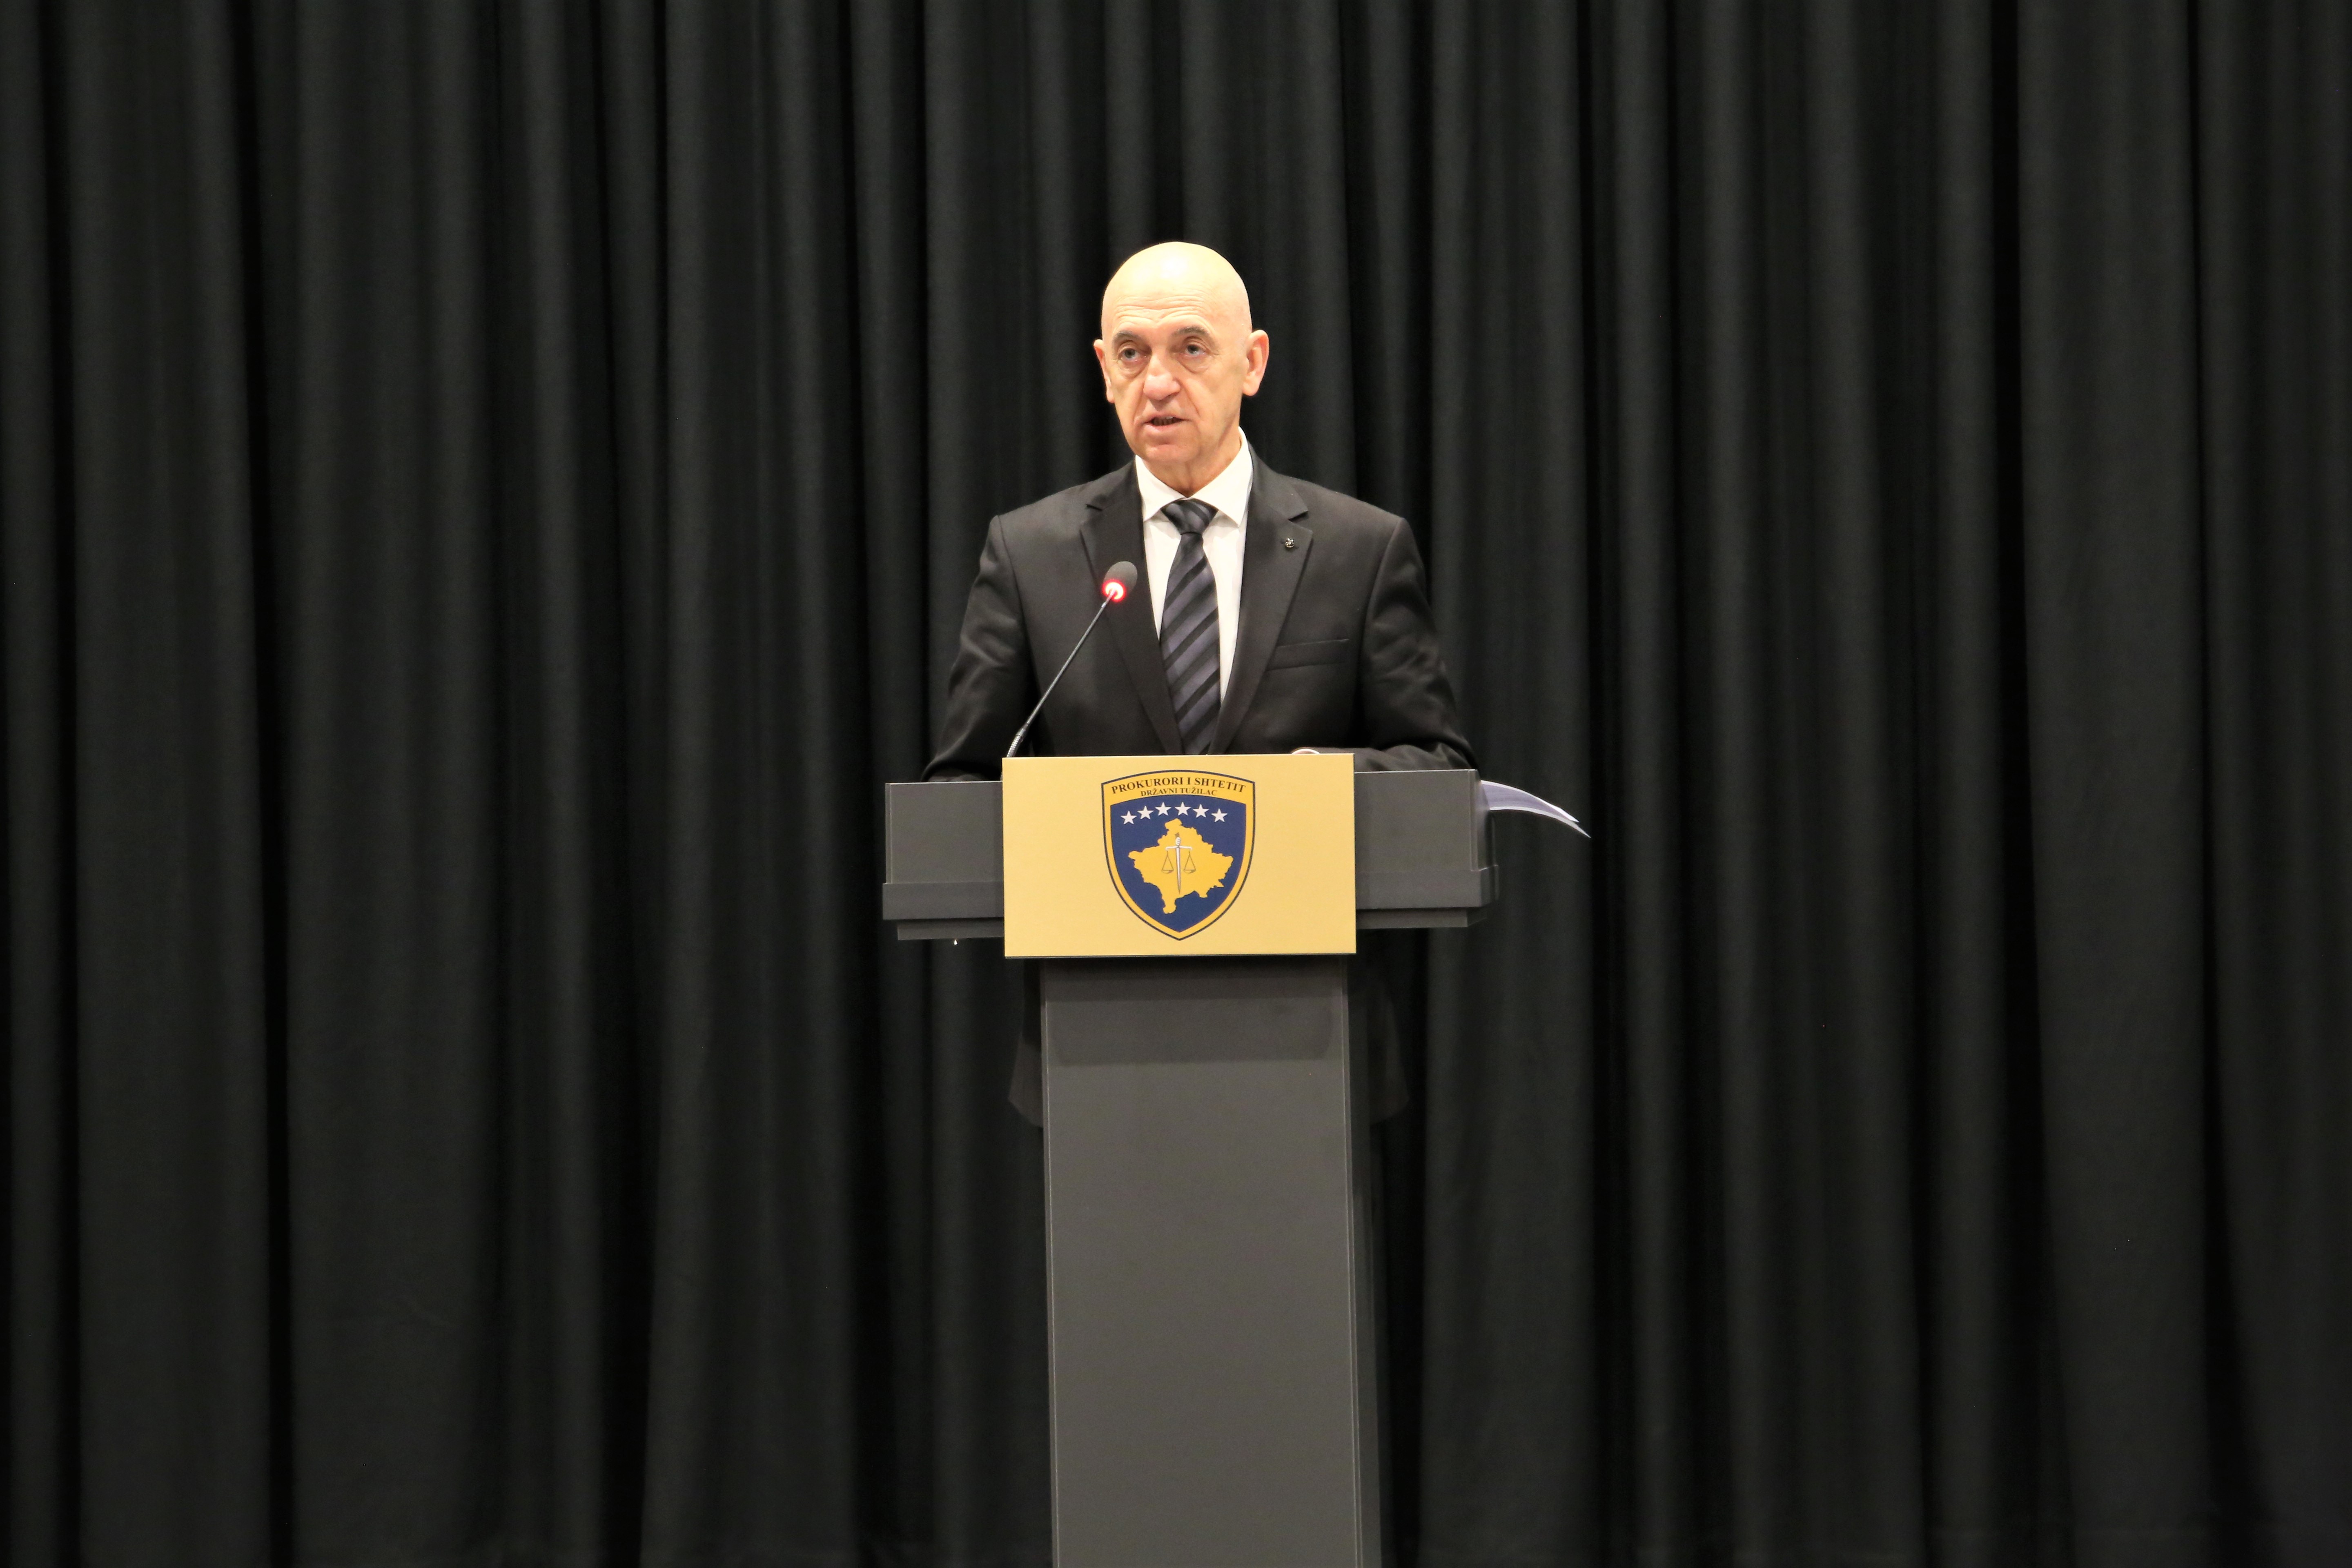 The speech of Acting Chief State Prosecutor, Mr. Besim Kelmendi, on holding the Annual Conference of Prosecutors